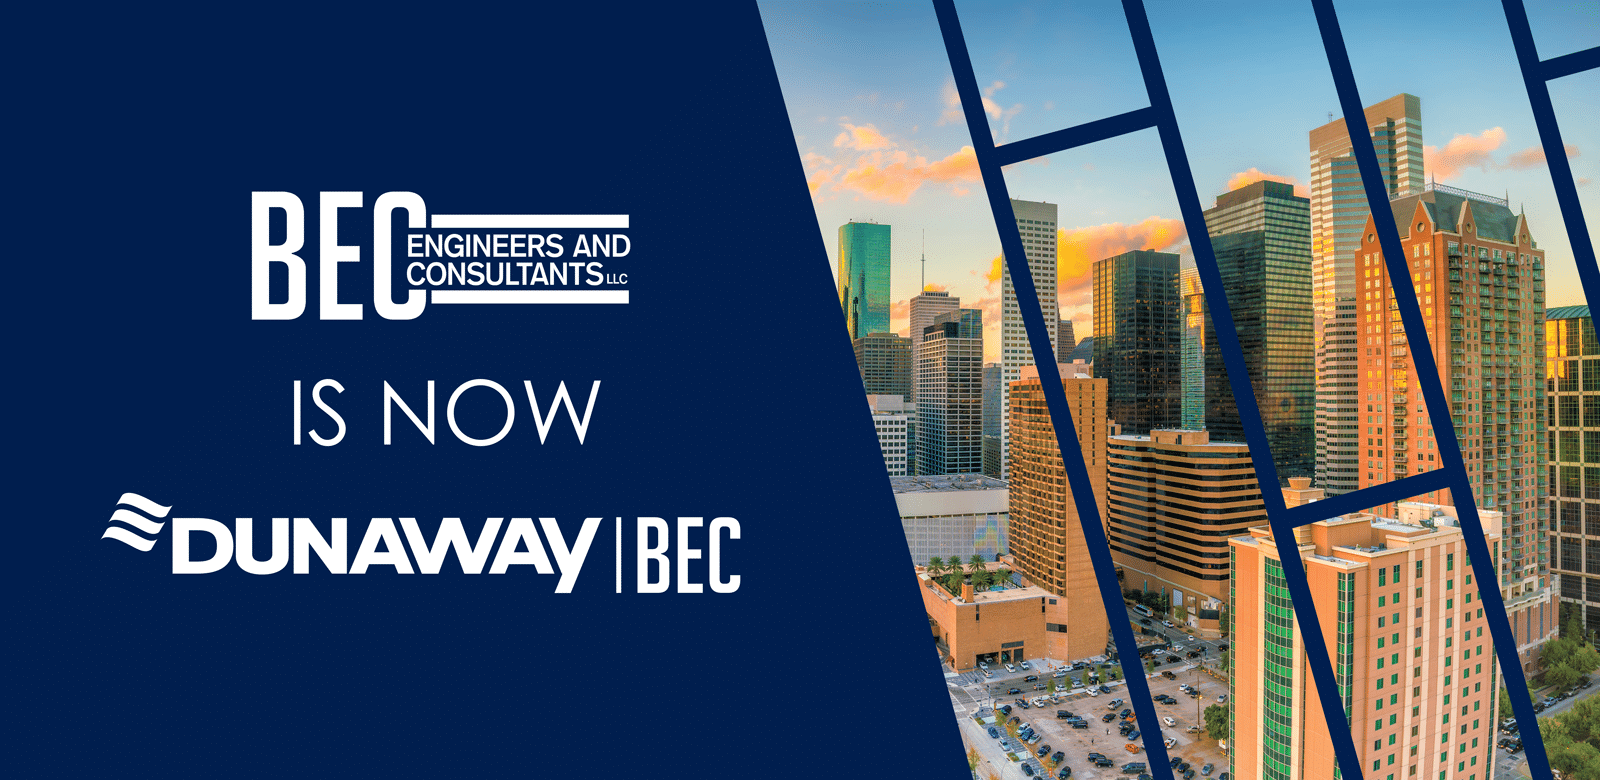 Dunaway’s Growth Continues with the Acquisition of BEC Engineers and Consultants